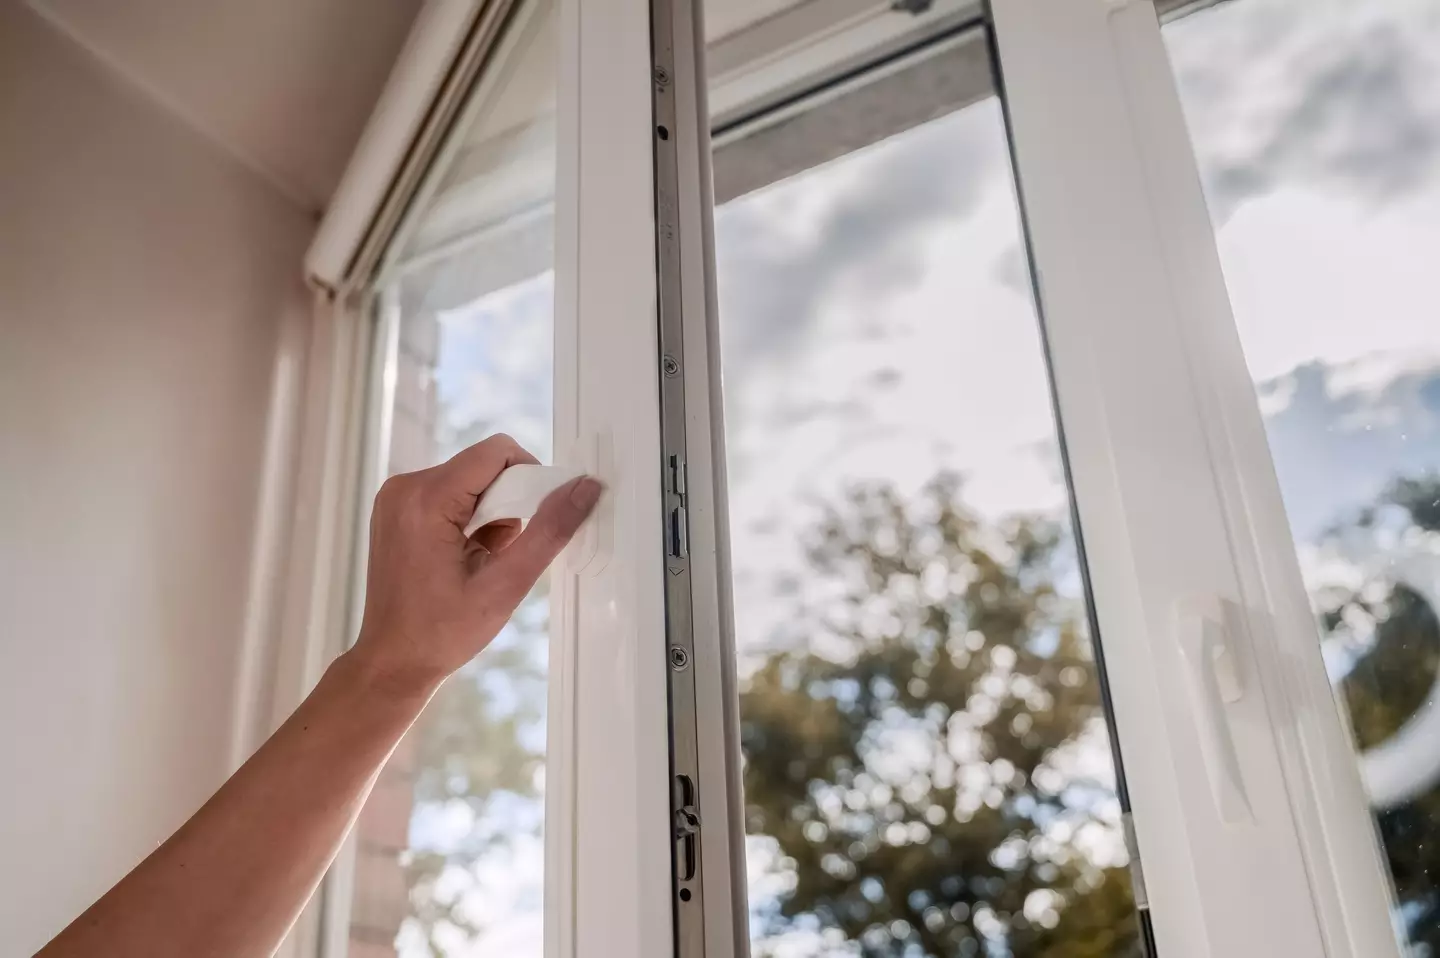 The expert recommended opening your windows to increase ventilation.